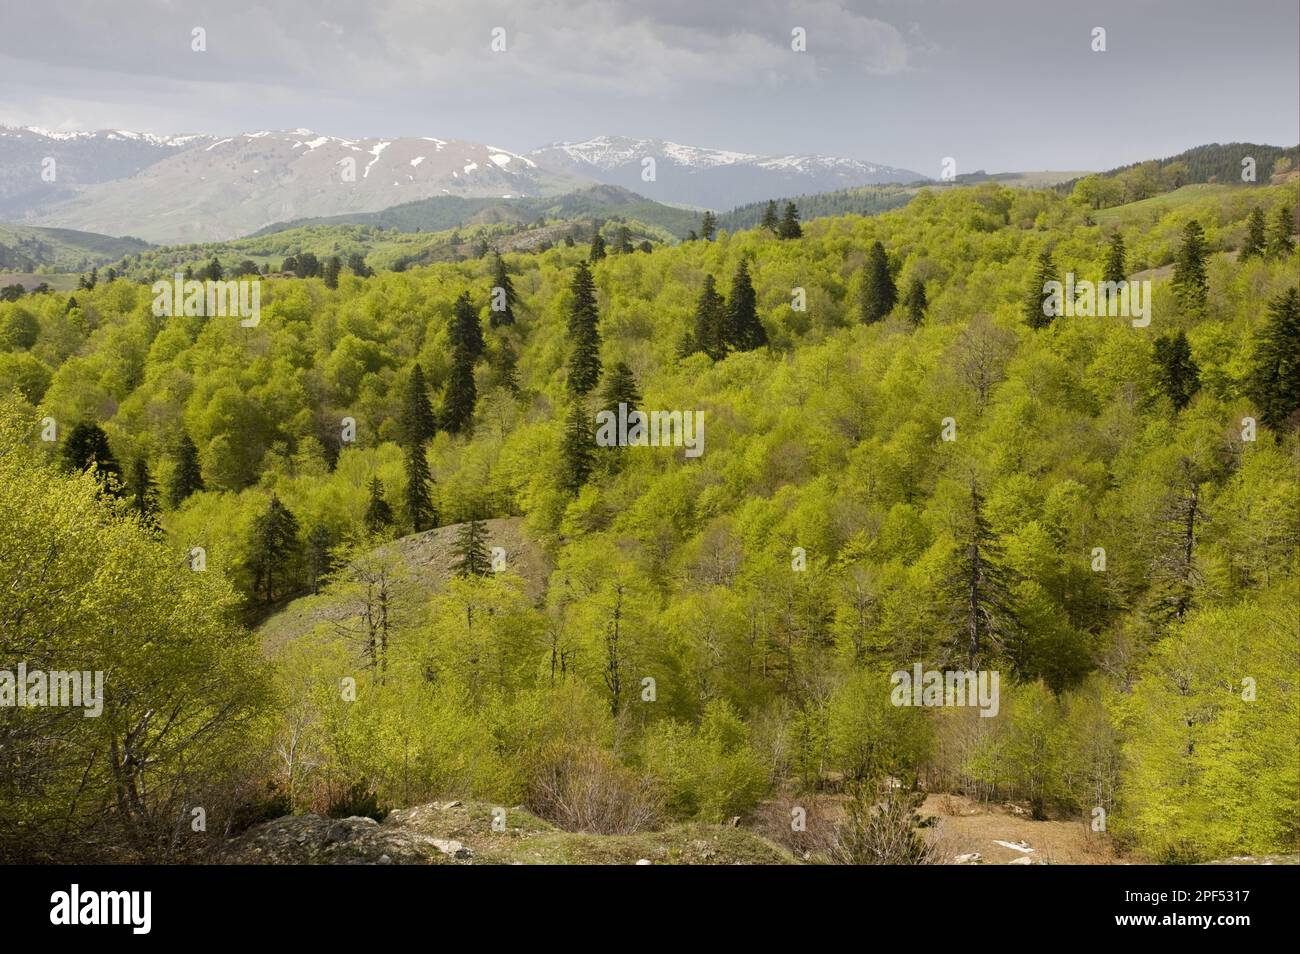 View over greek fir (Abies cephalonica) and beech forest habitat, looking north from Katara Pass, Central Pindos Mountains, Northern Greece, Spring Stock Photo